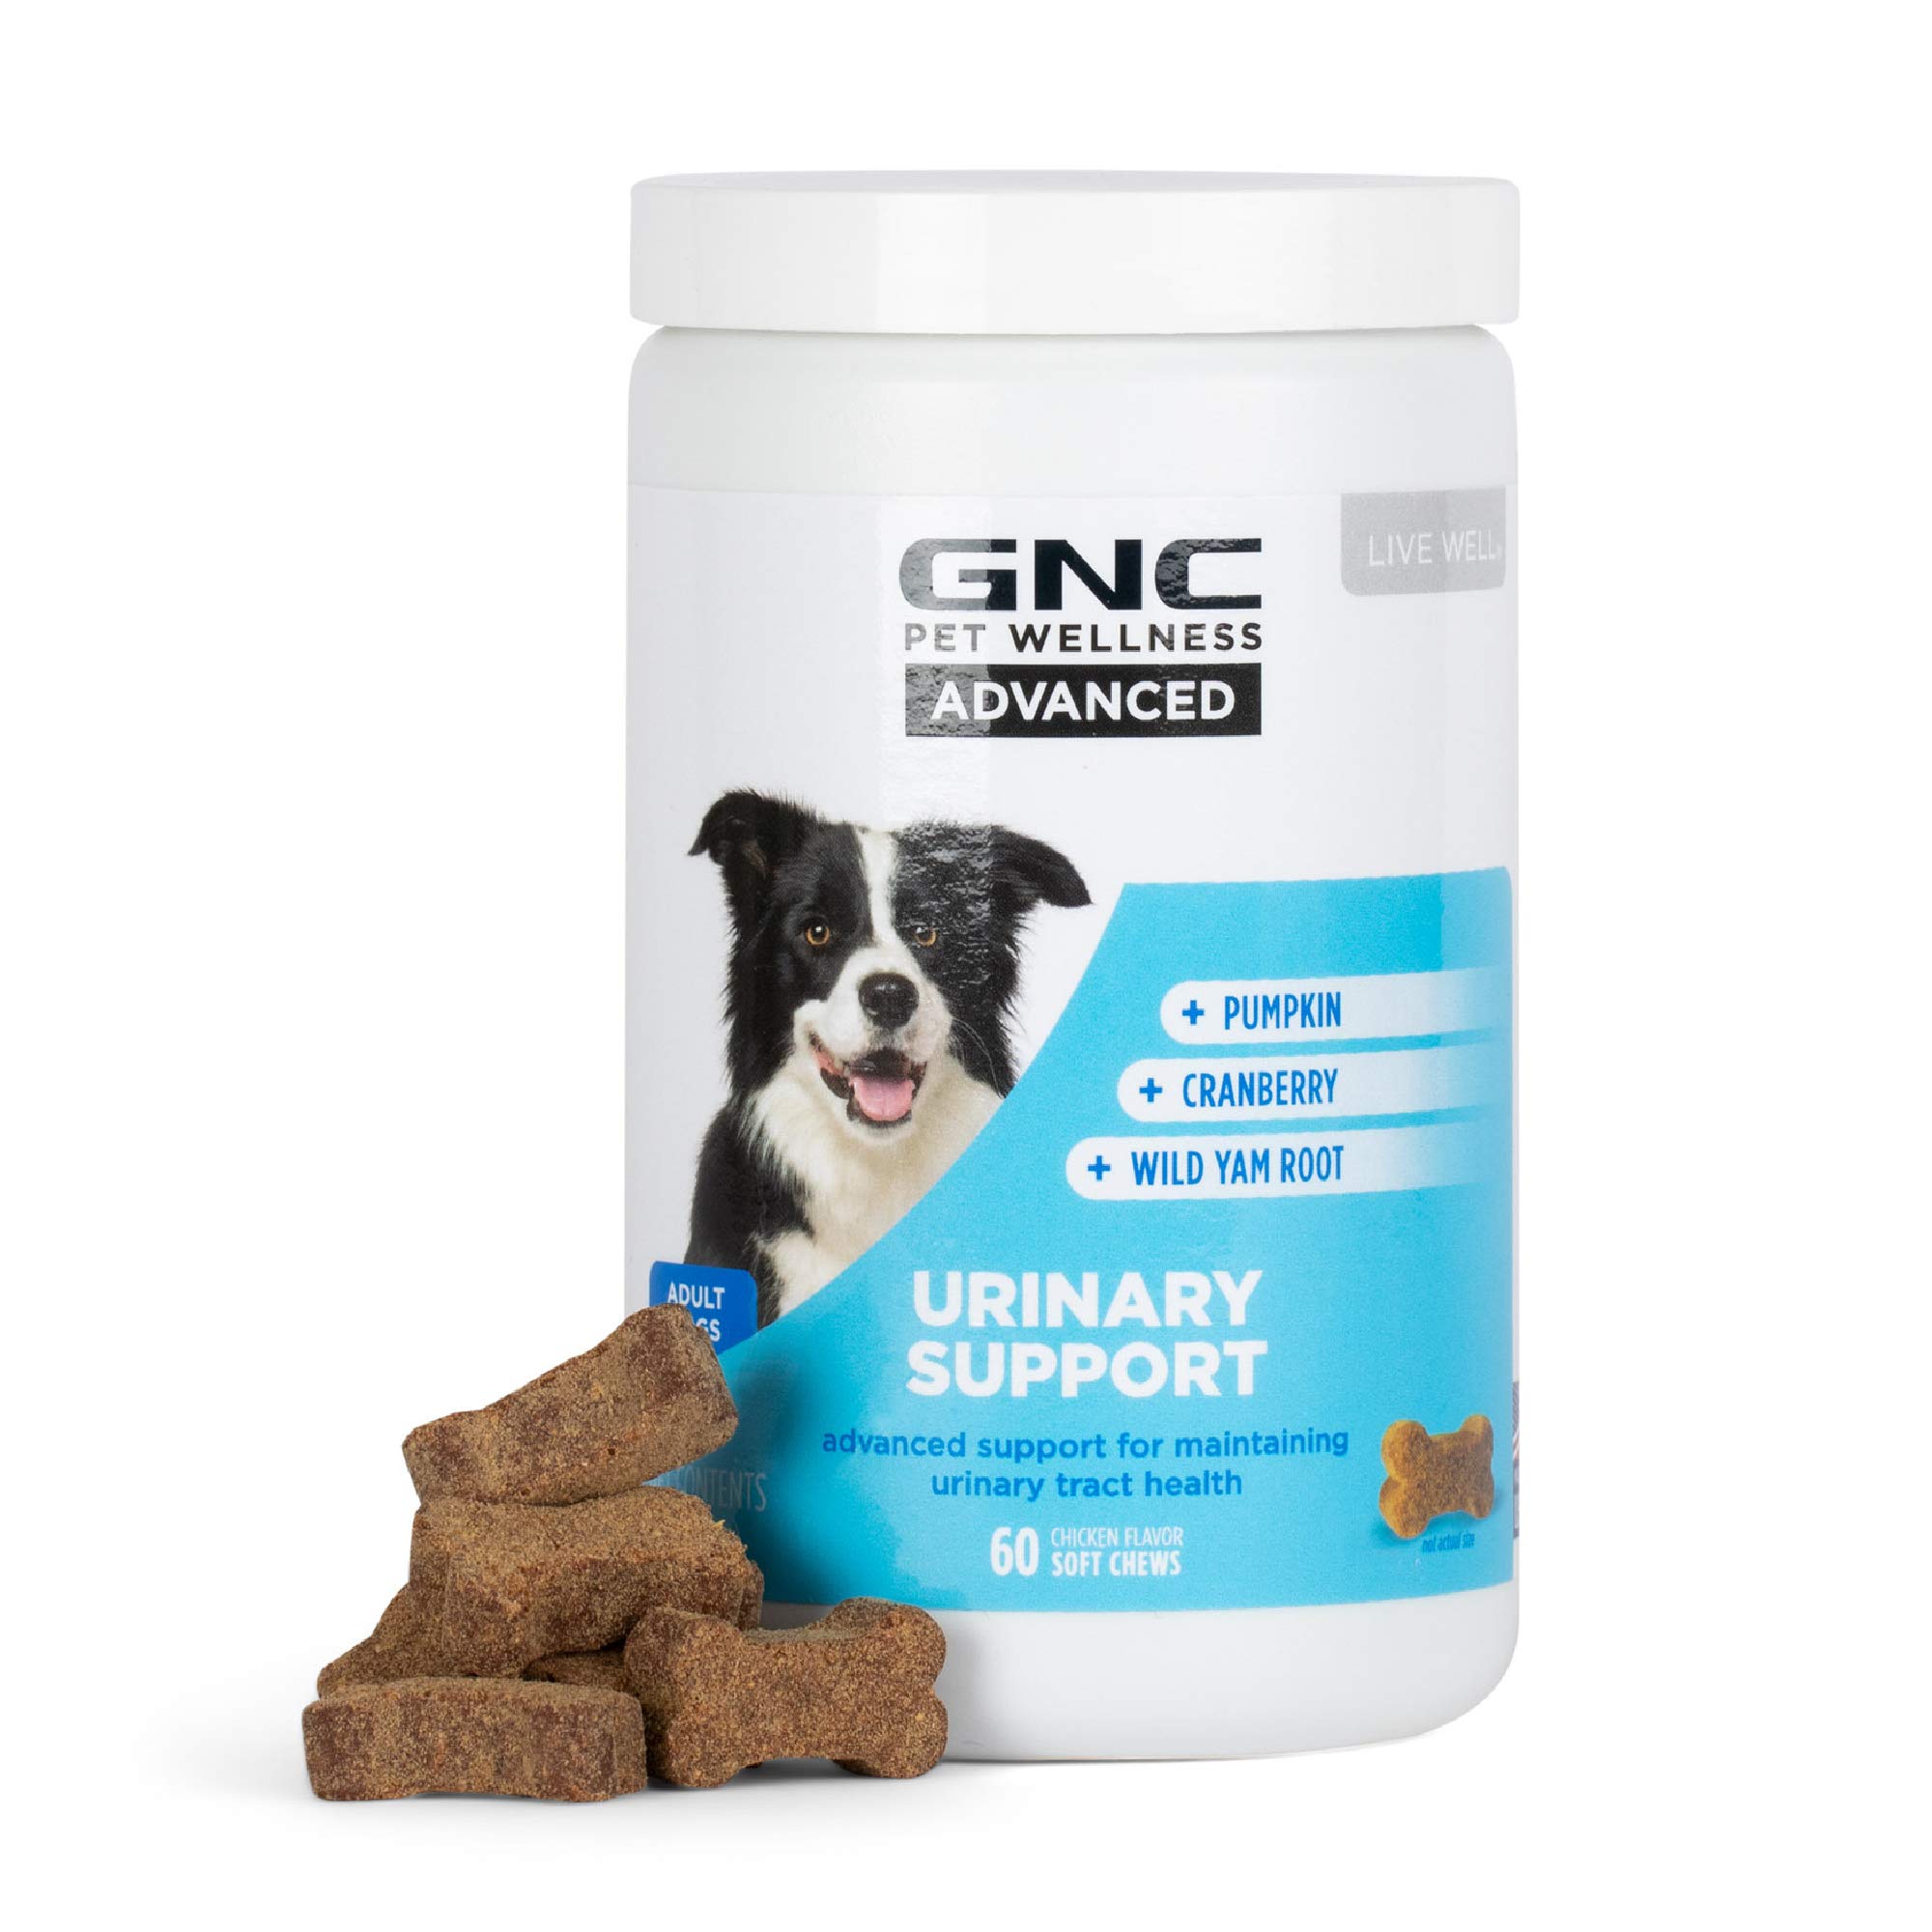 Beloved Pets Store Launches Amazing New Supplement to Help Dogs and Cats Treat Kidney Stones, UTI, and other Urinary Tract Disorders 1